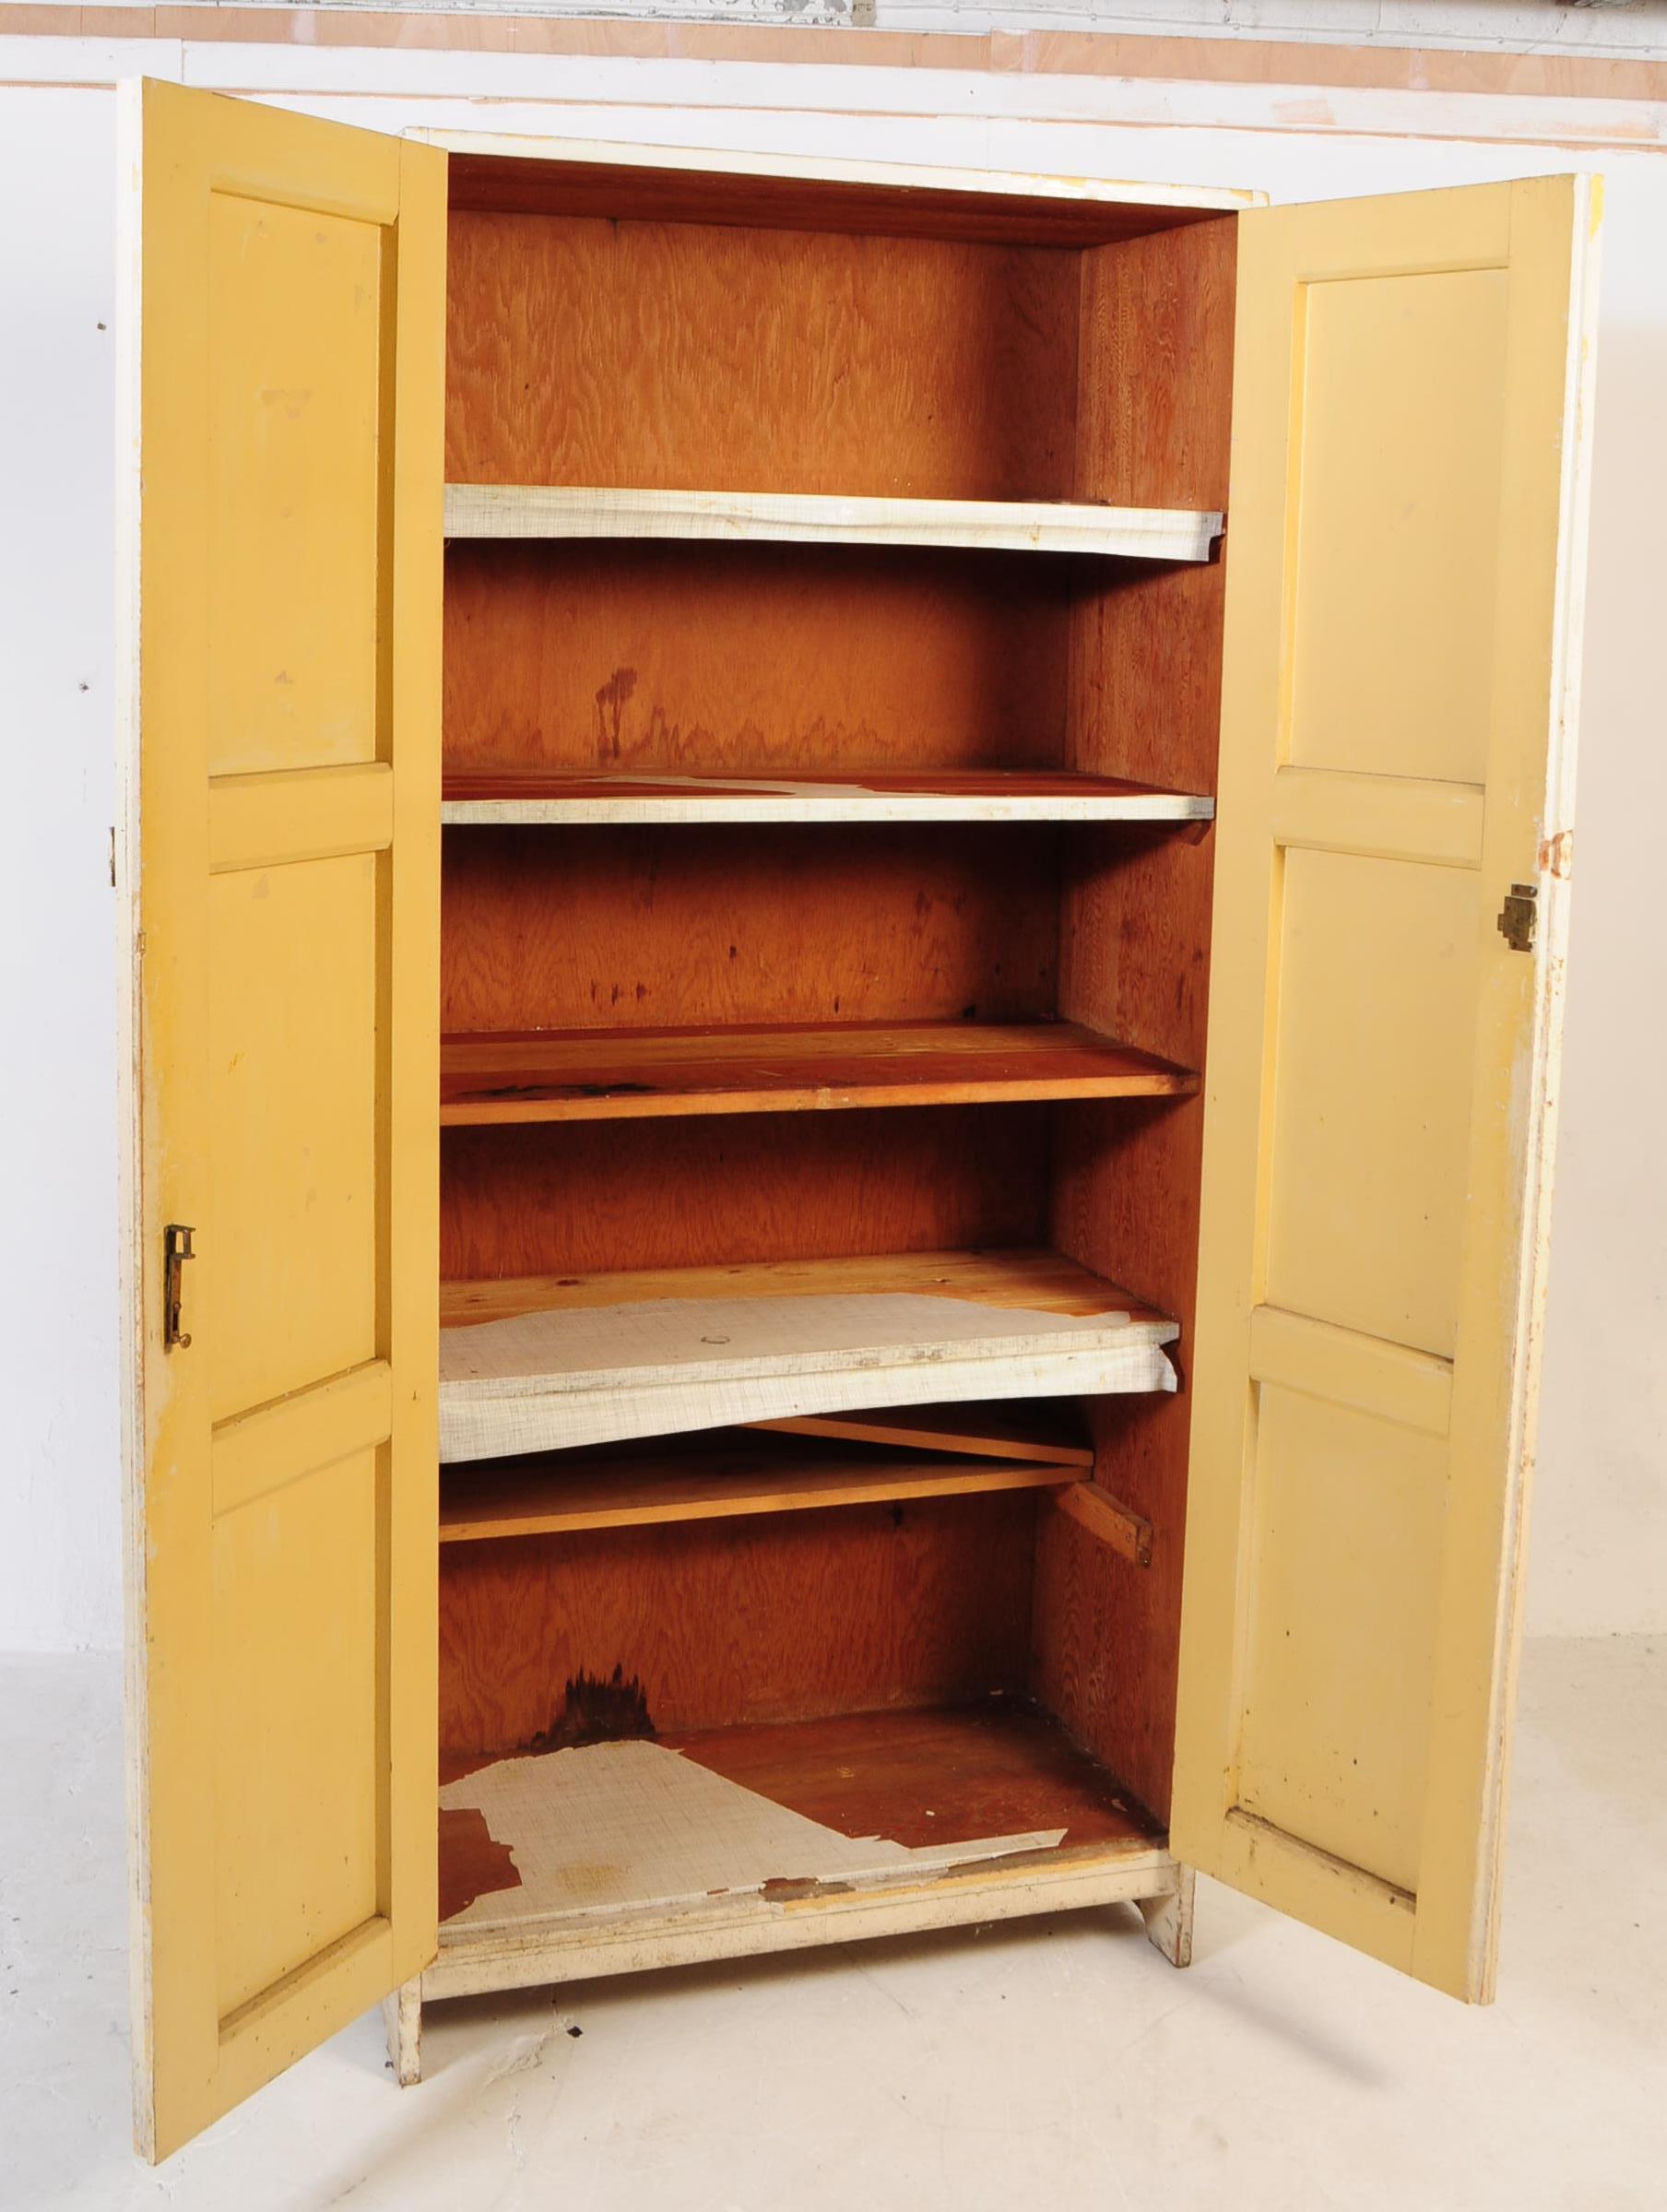 MID 20TH CENTURY PAINTED PITCH PINE KITCHEN CUPBOARD